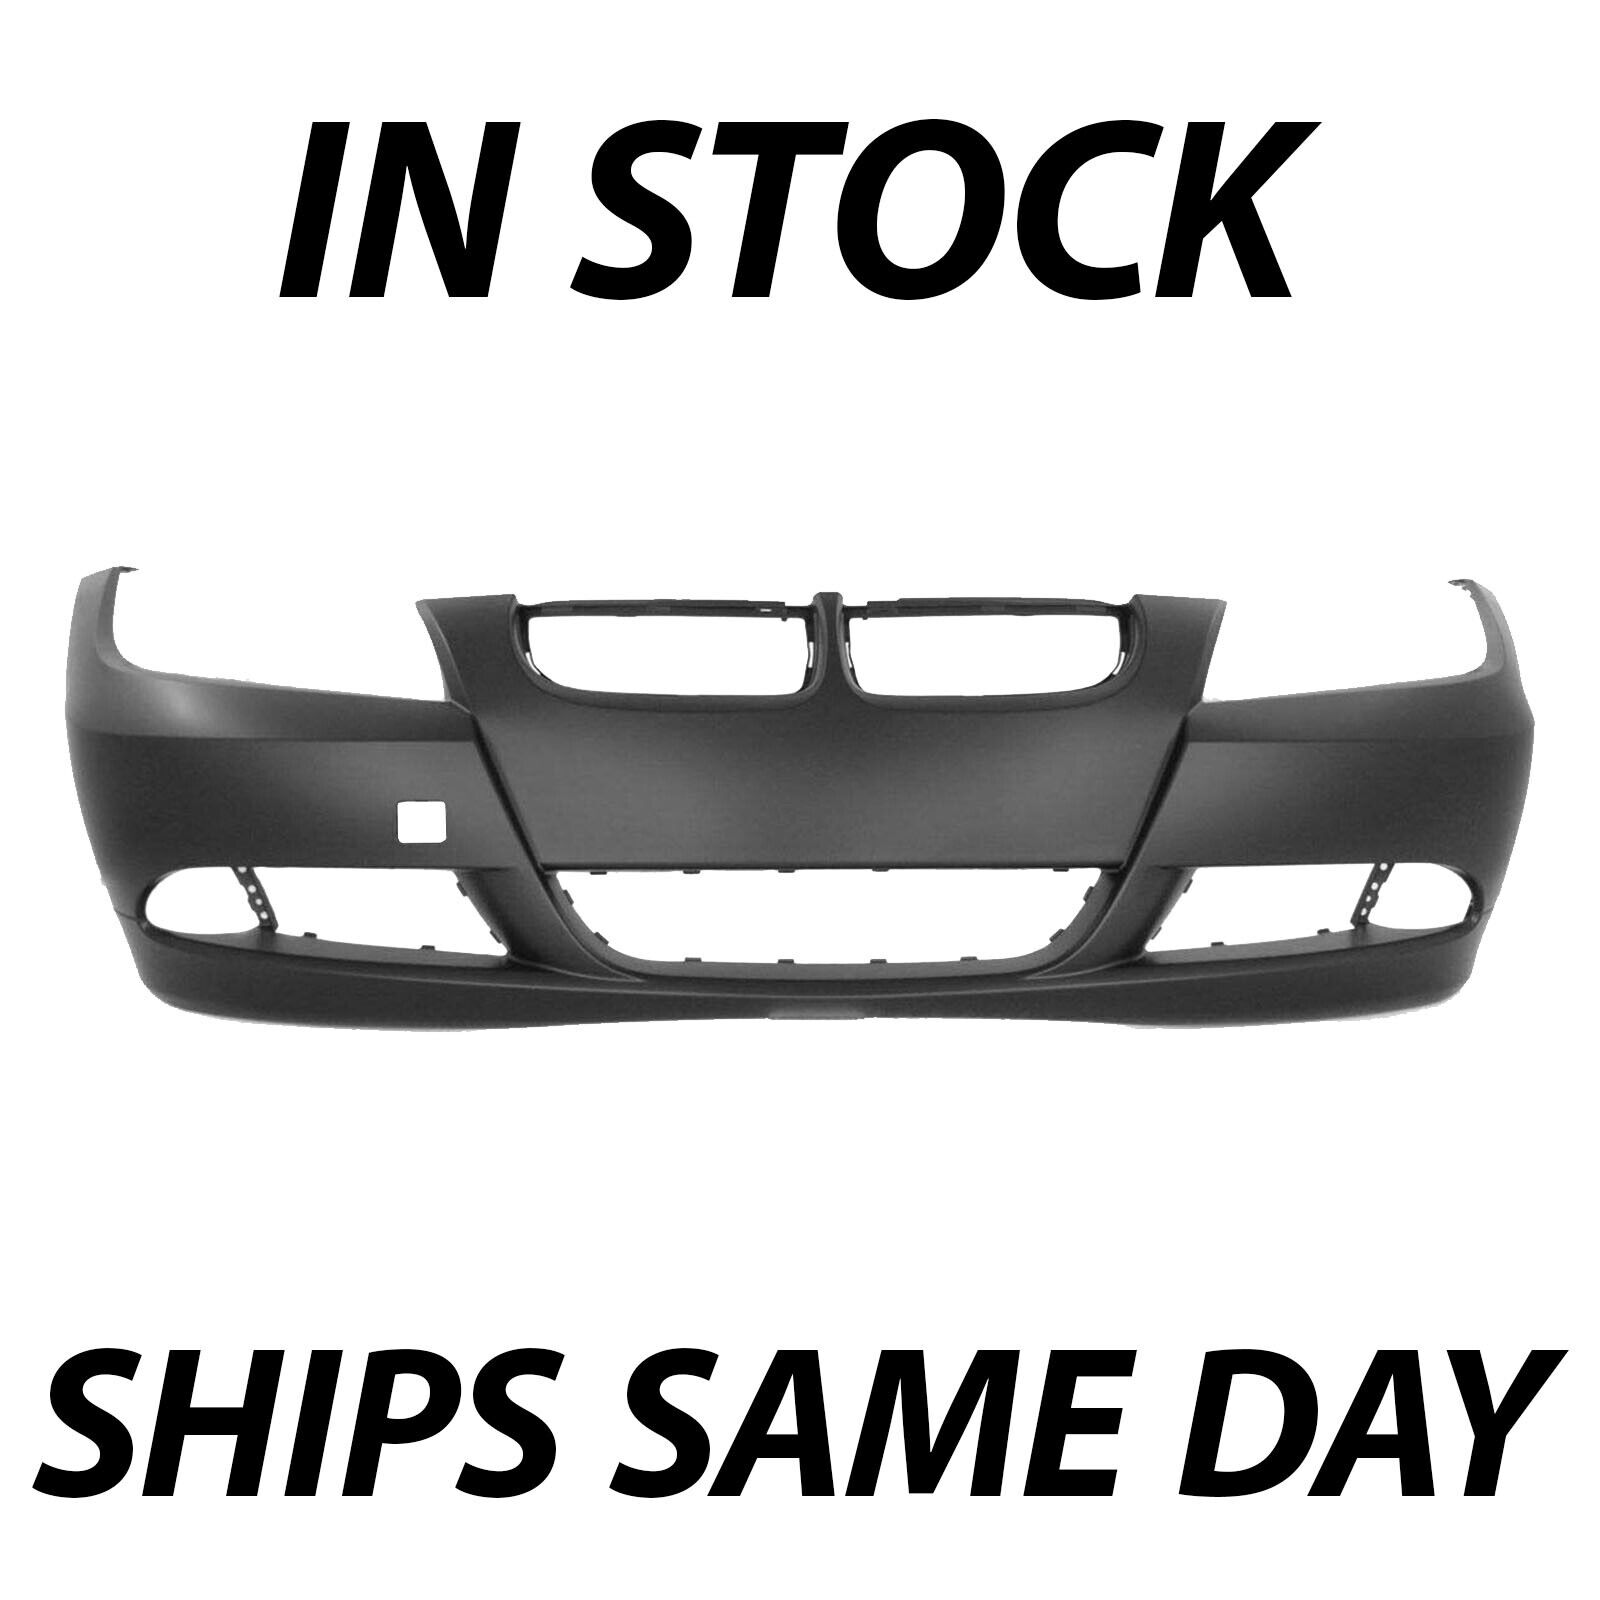 NEW Primered Front Bumper Cover for 2006 2007 2008 BMW 325 323 328 330 3-Series